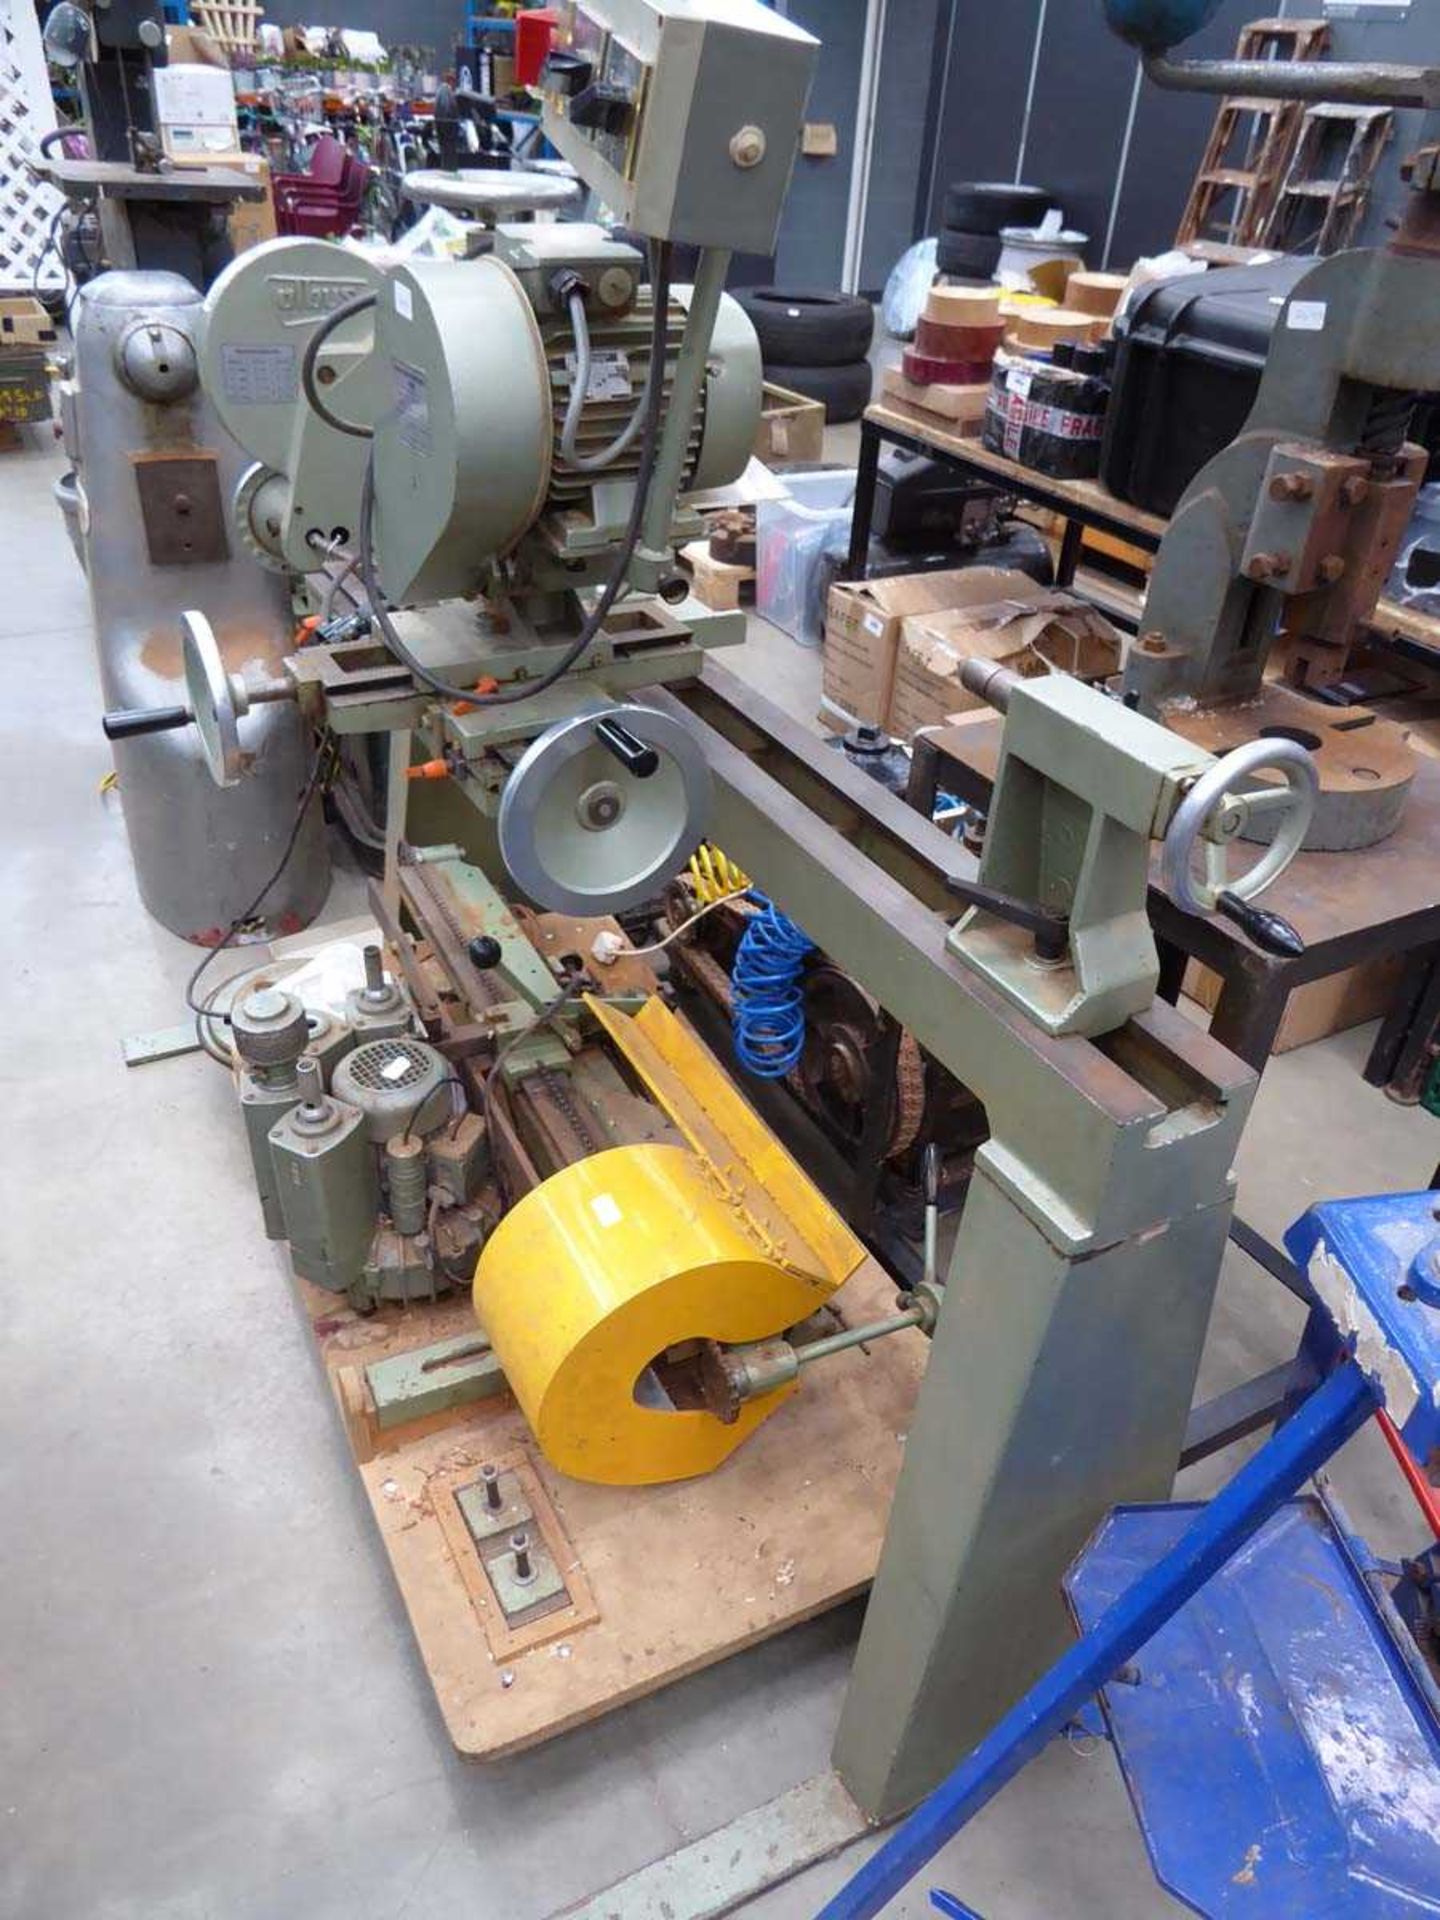 Hapco Albus woodturning copy lathe with 4ft bed and barley twist tooling, 3 phase electric - Image 5 of 5